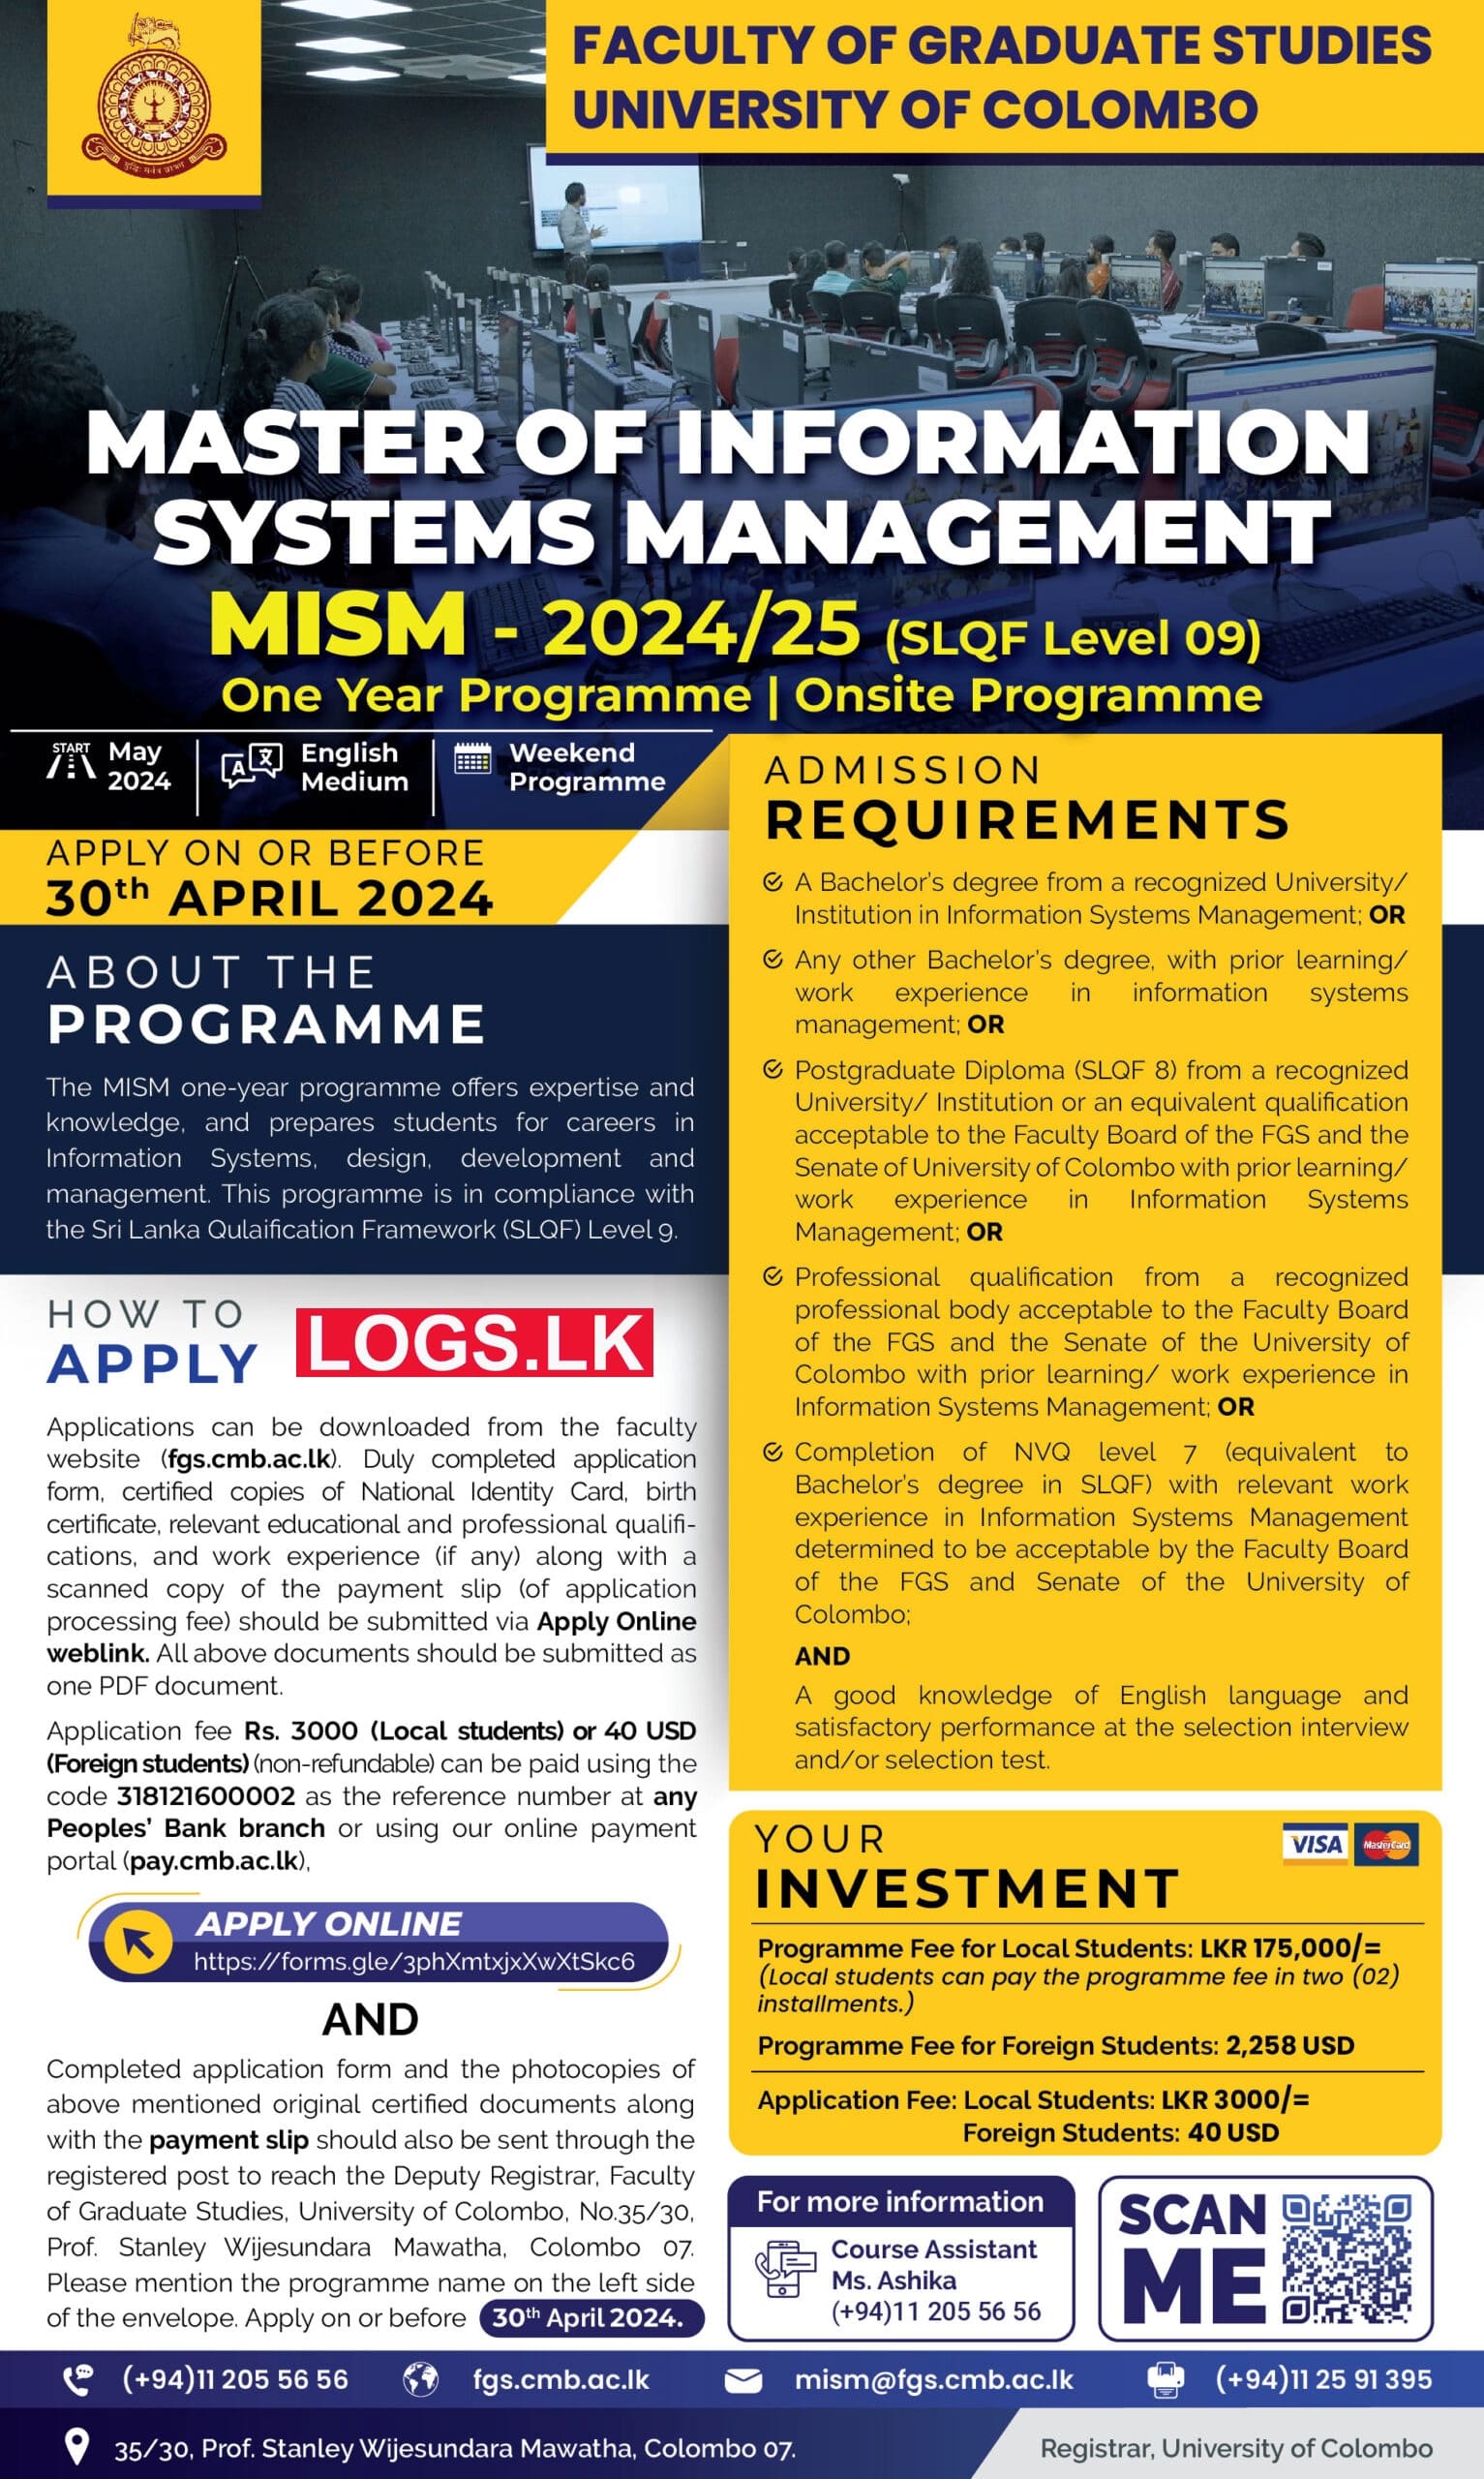 Master of Information Systems Management (MISM) 2024 - University of Colombo Application Form